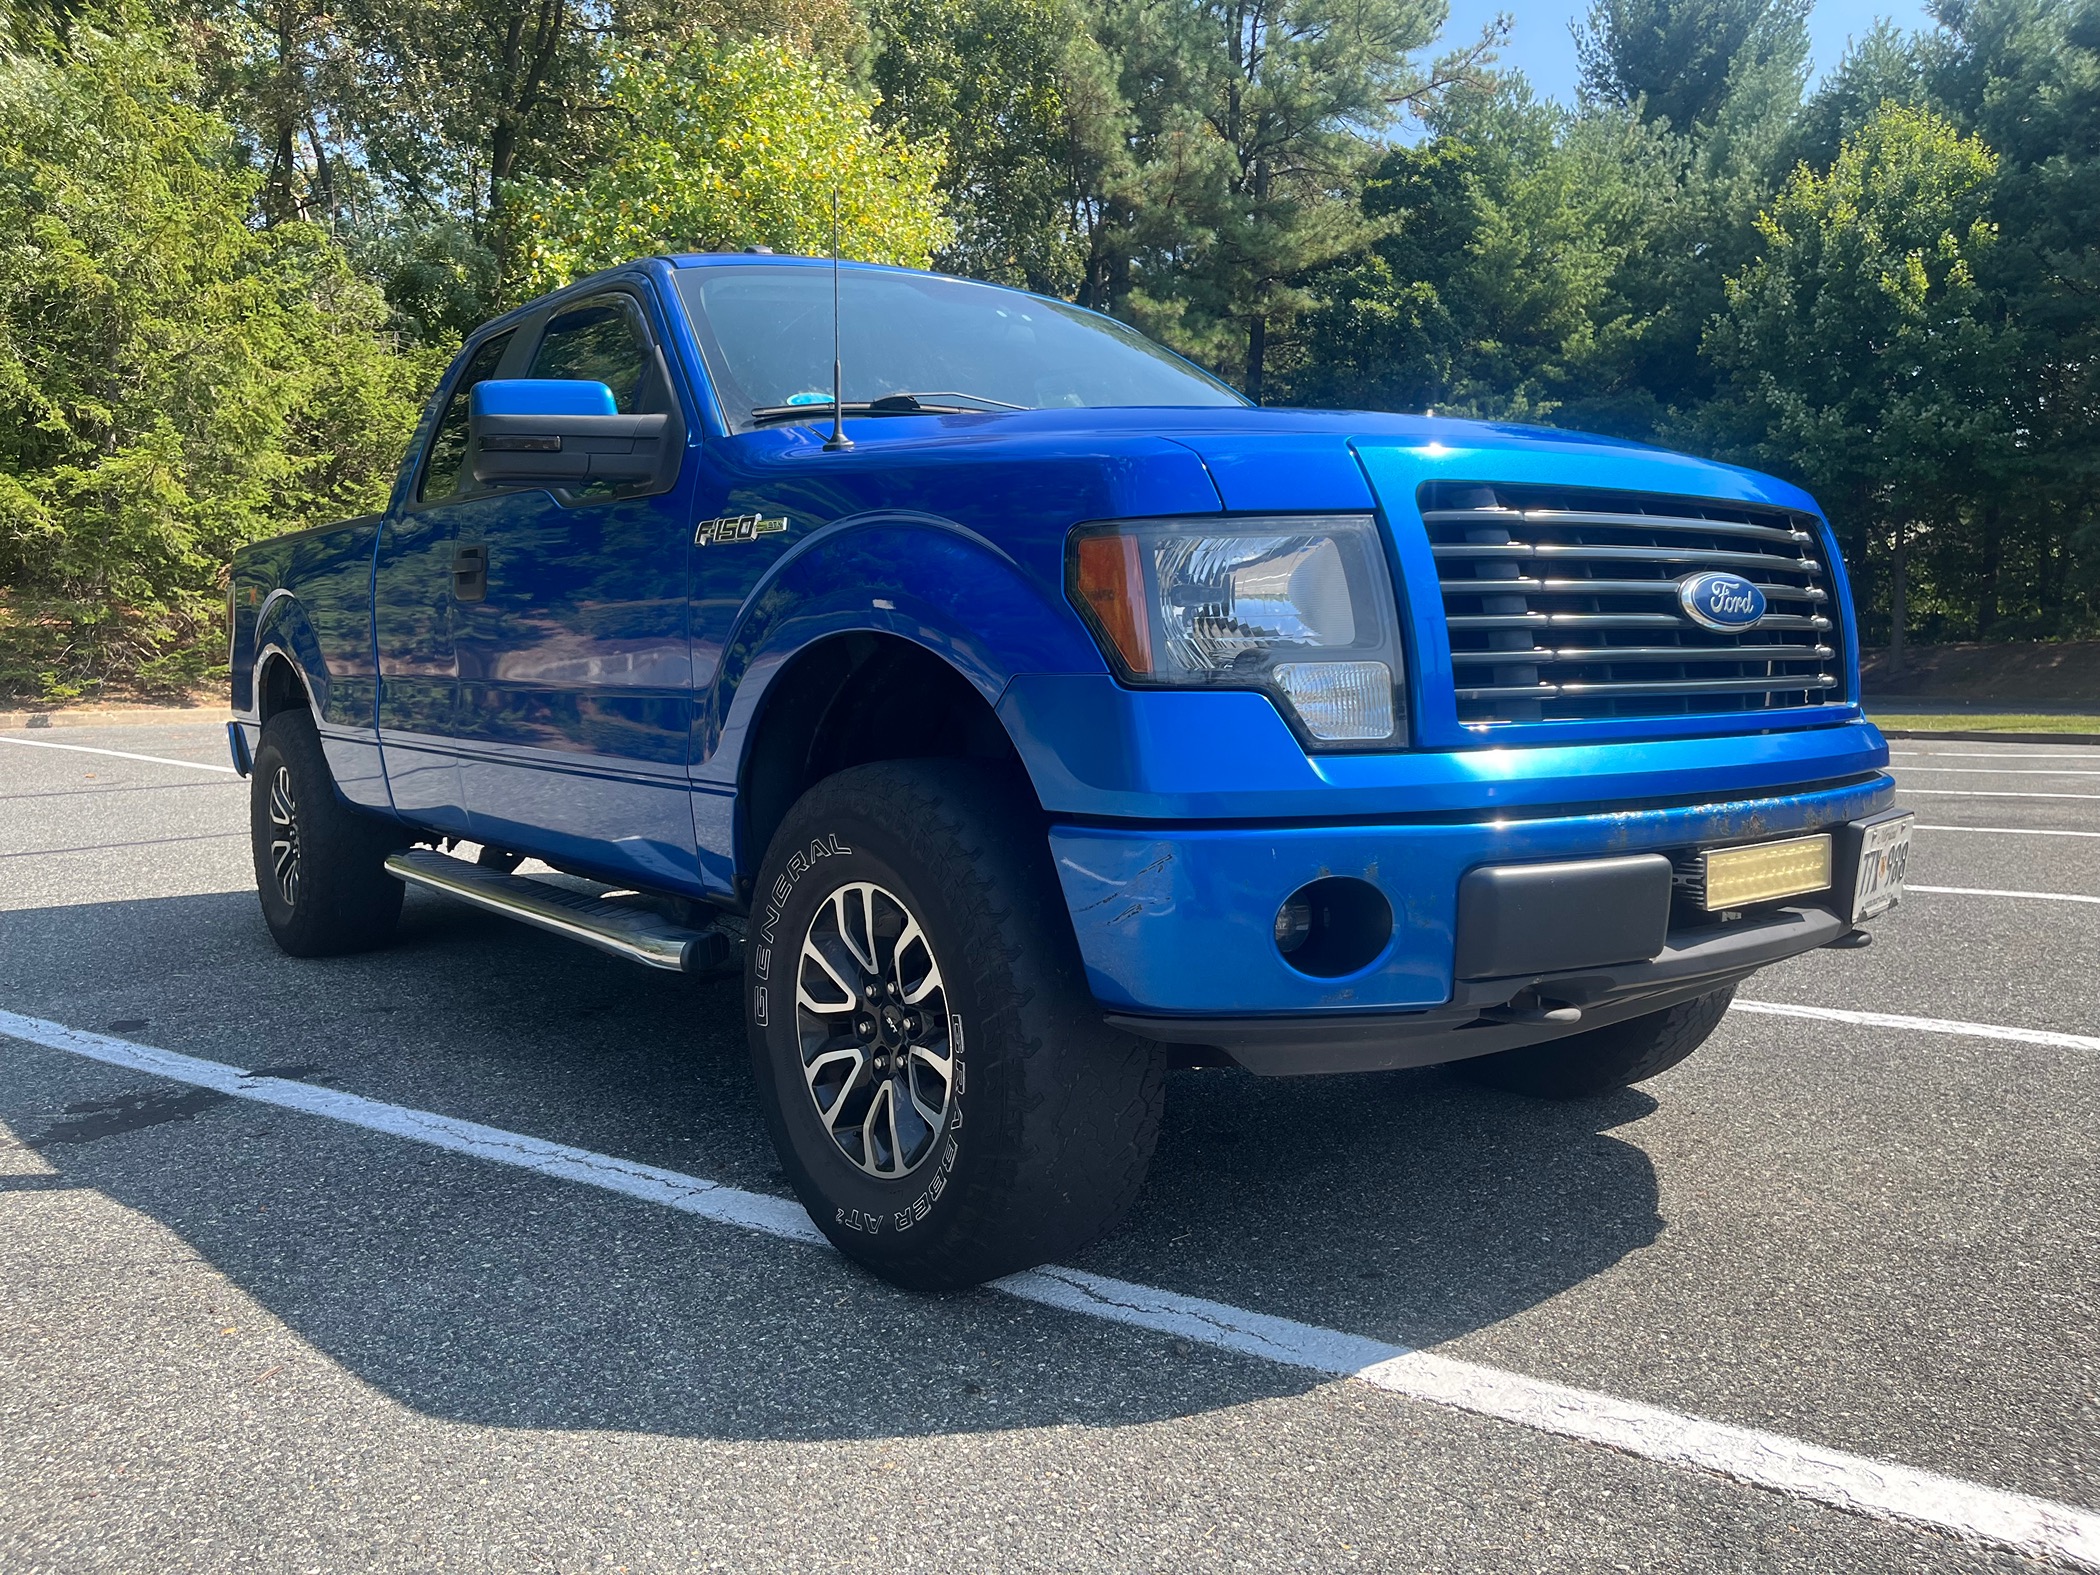 Ford F-150 Random F-150 Photos of the Day - Post Yours! 📸 🤳 IMG_5165